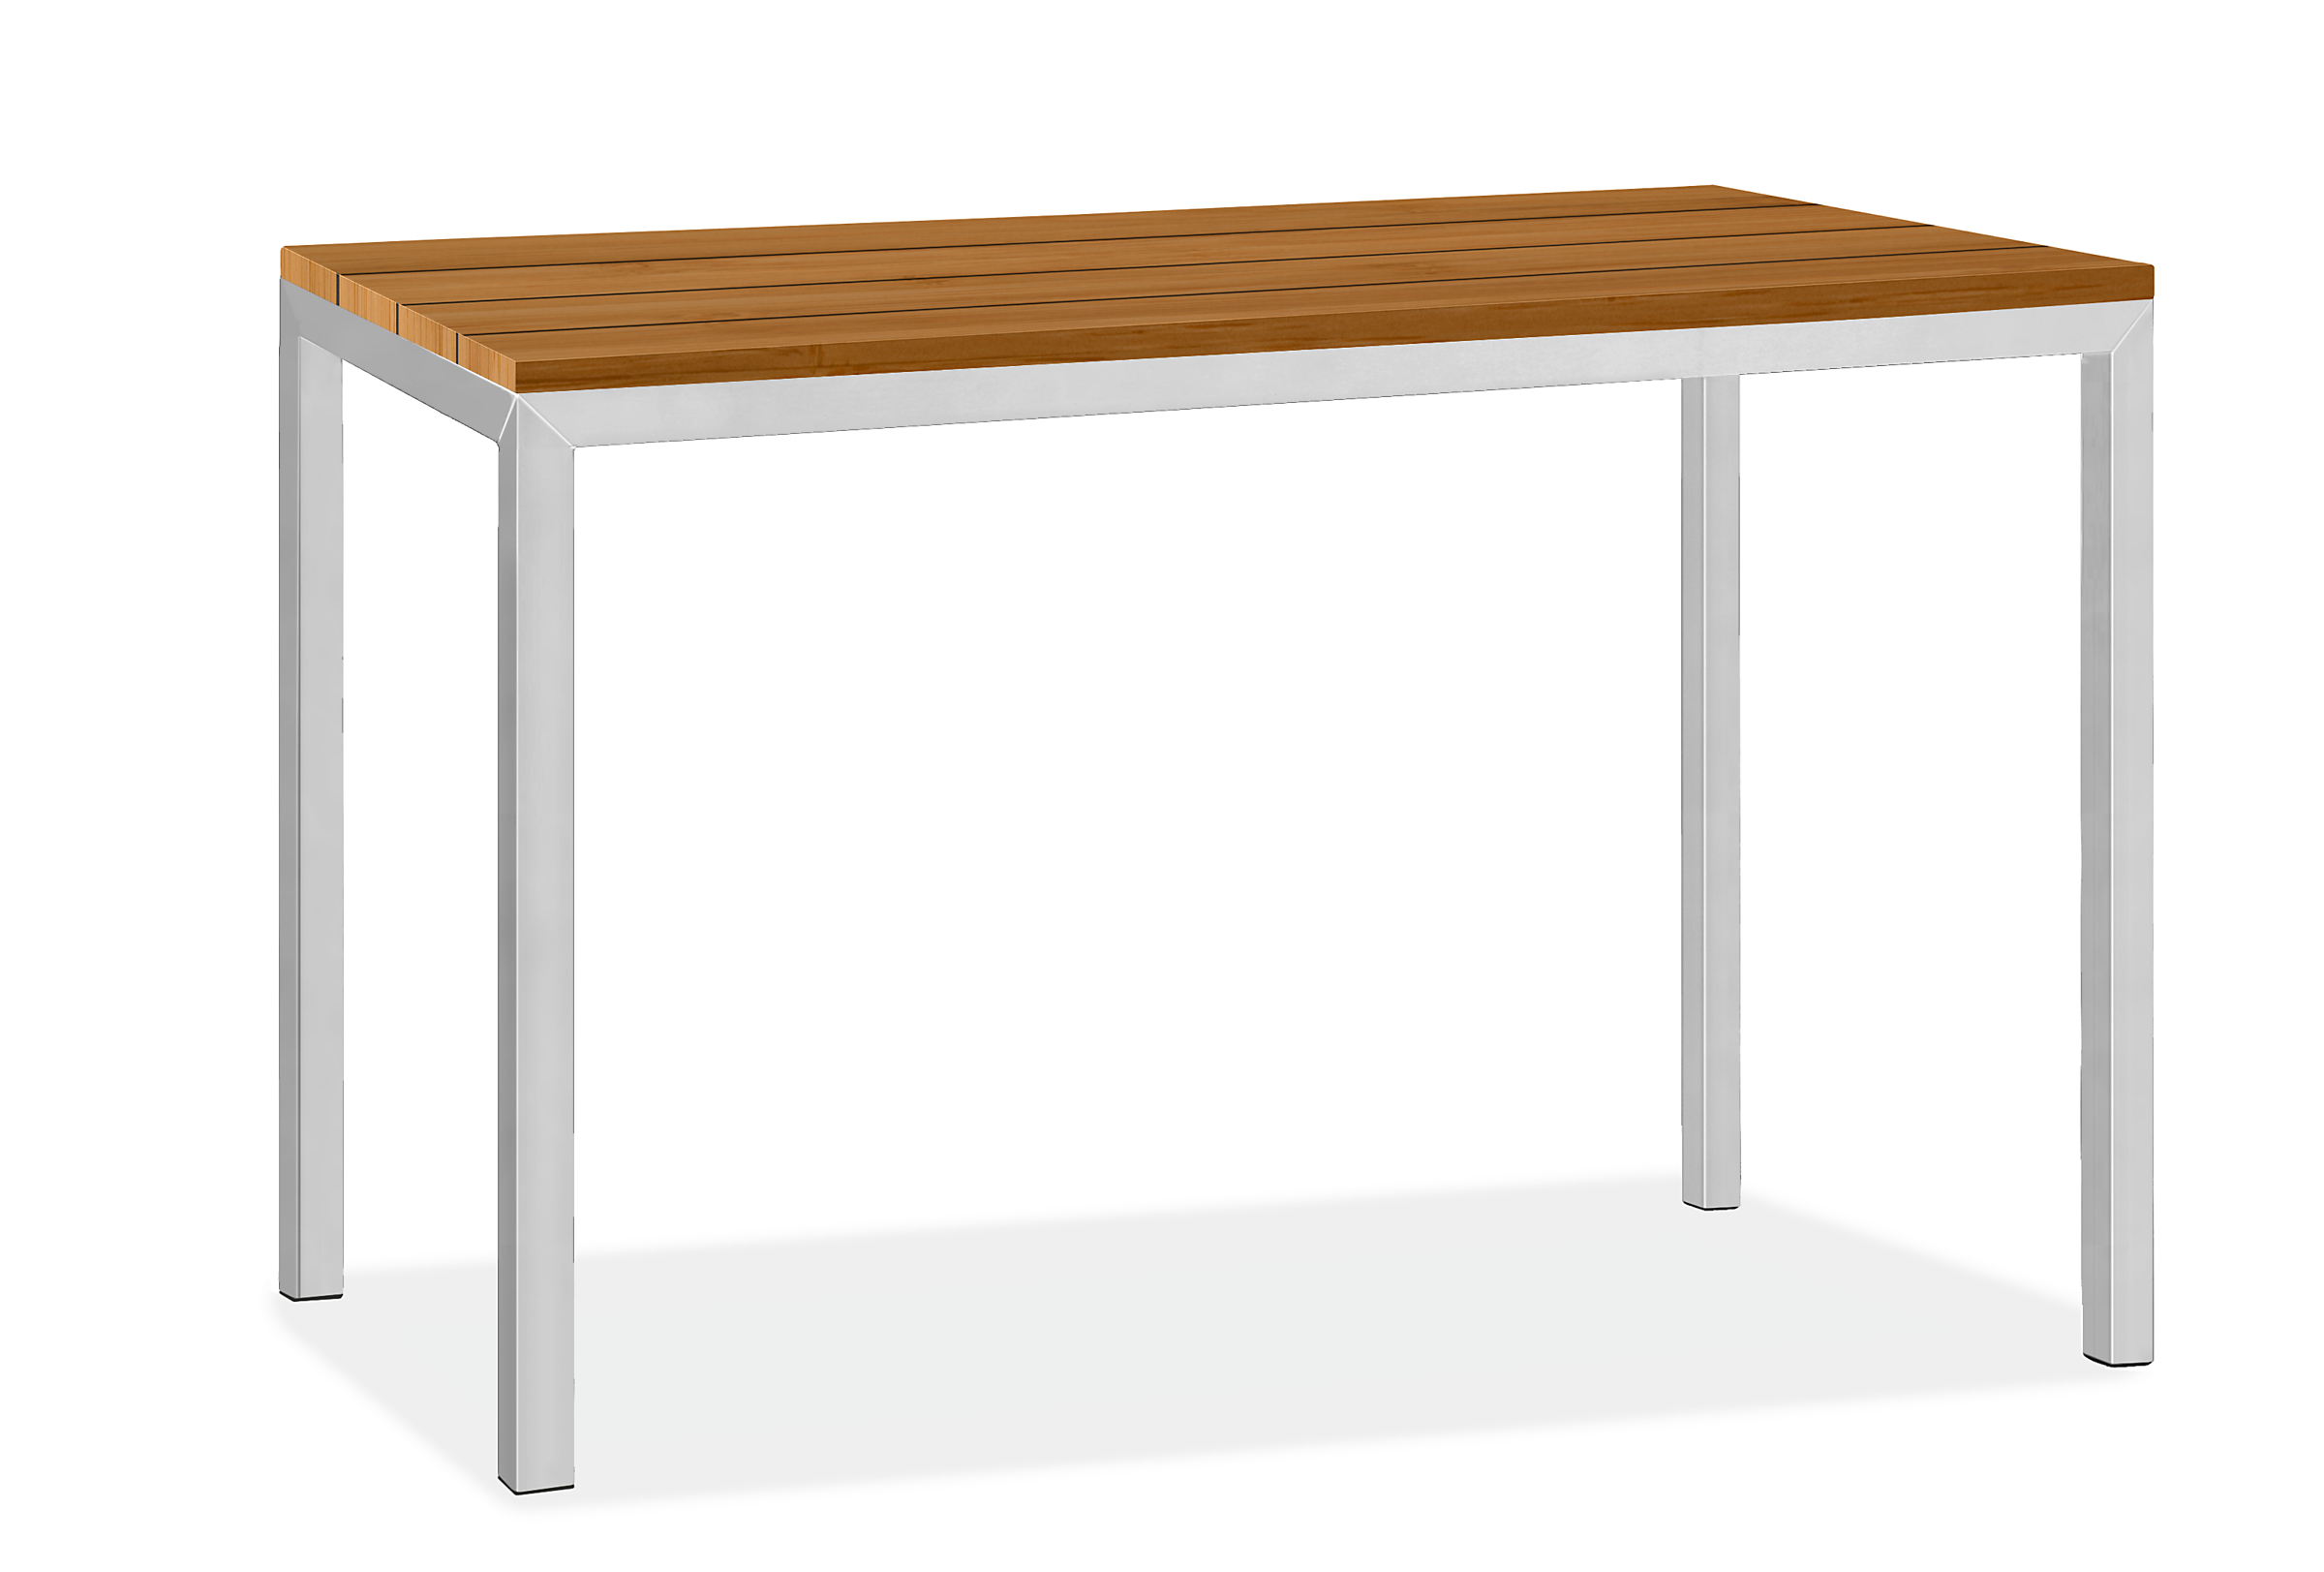 Parsons 48w 24d 35h Outdoor Counter Table with 1.5" Leg